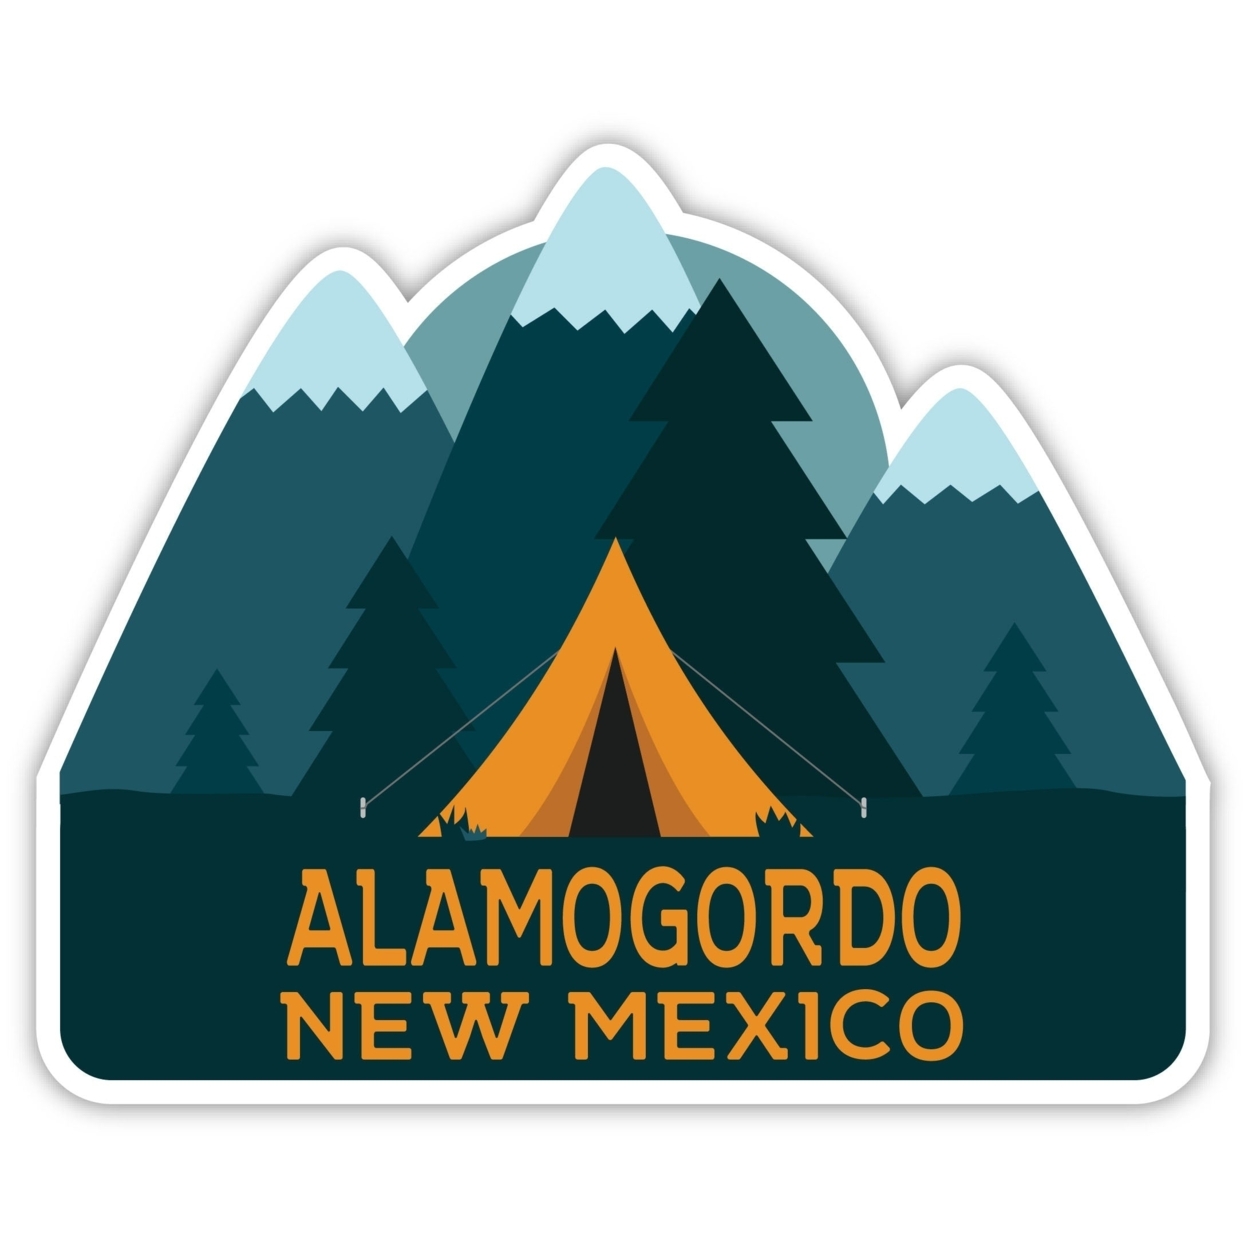 Alamogordo New Mexico Souvenir Decorative Stickers (Choose Theme And Size) - 4-Pack, 12-Inch, Tent